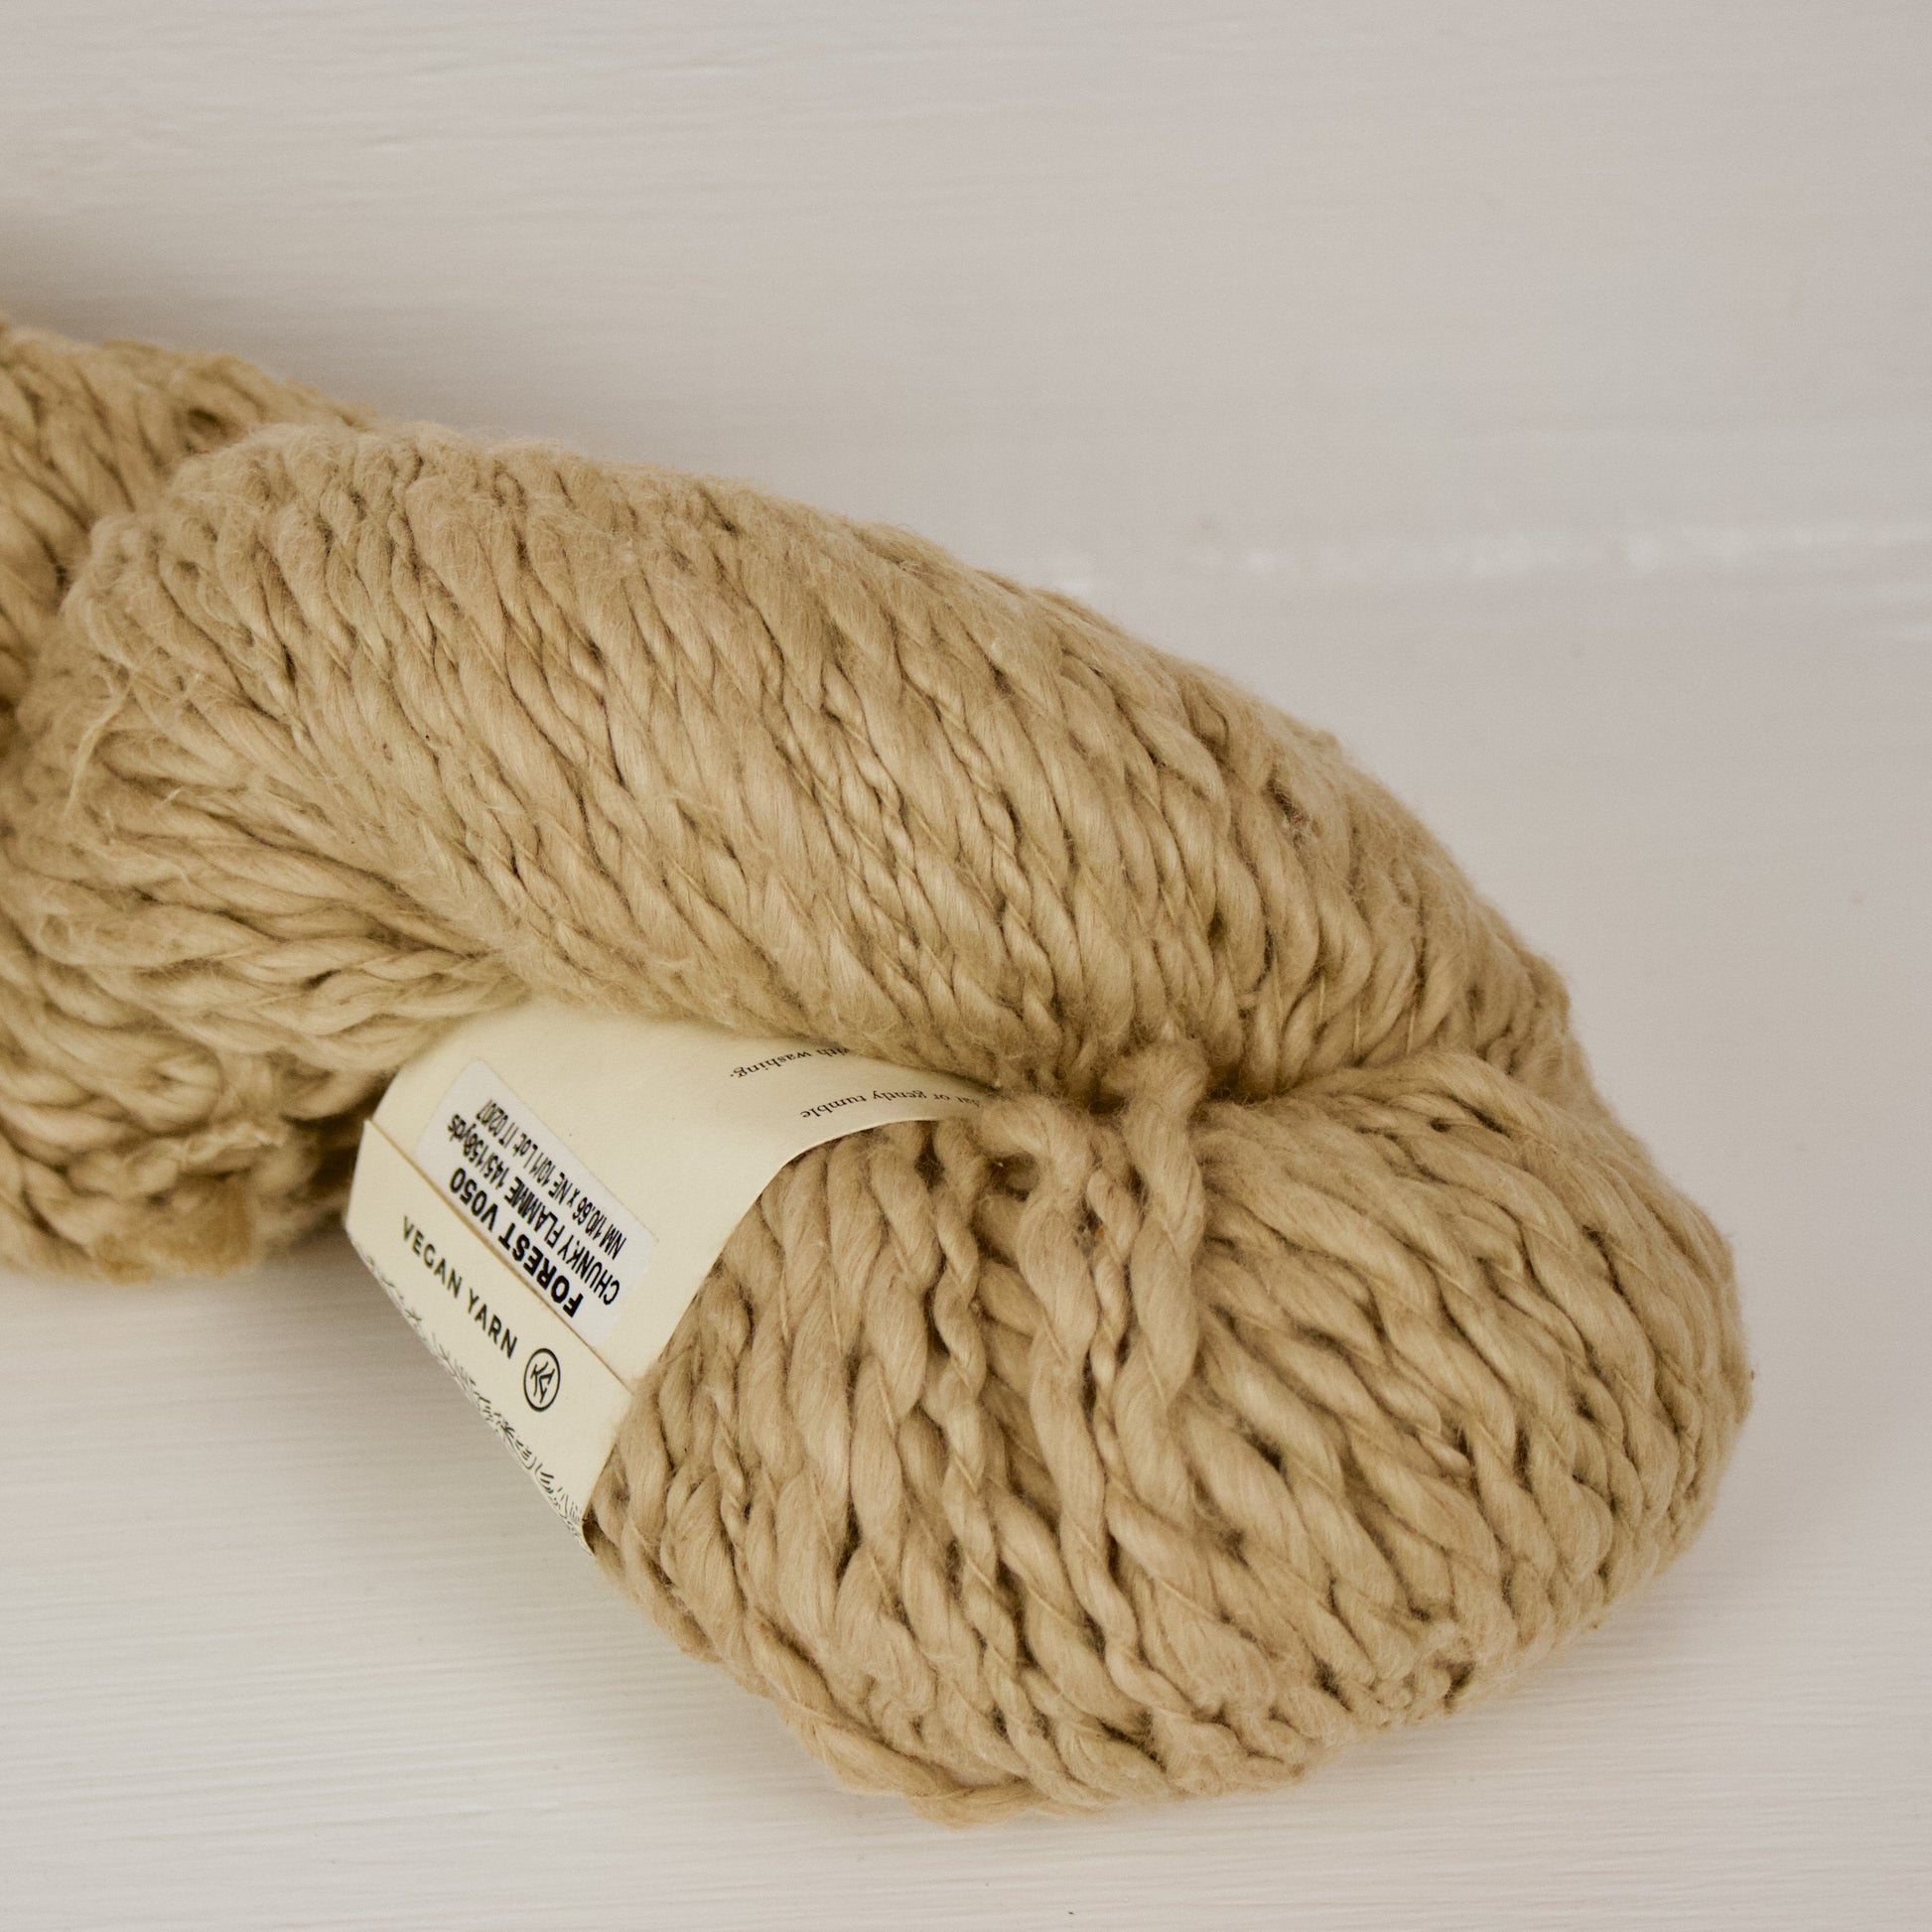 Forest Mist Vega x Pakucho is a thick and thin super bulky that's a natural warm light brownish green that's slightly more yellowy green than avocado pakucho. The skein is large and fluffy.